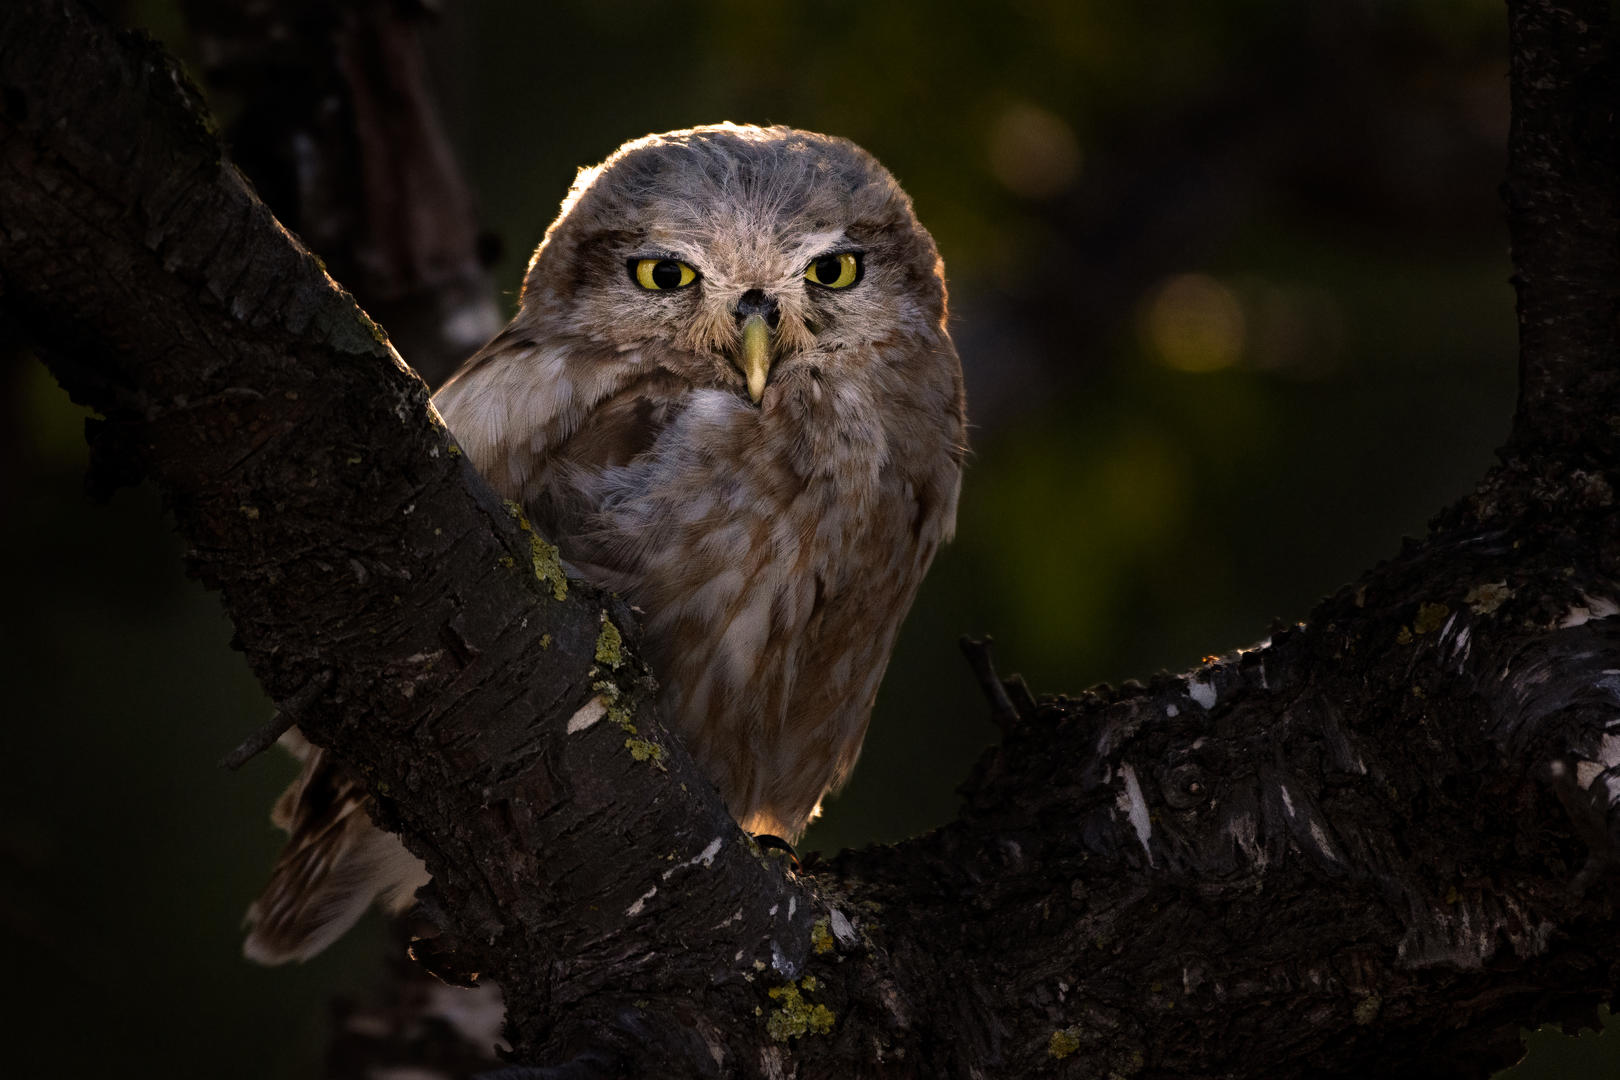 Little Owl focused at a potential meal by Ariel Fields